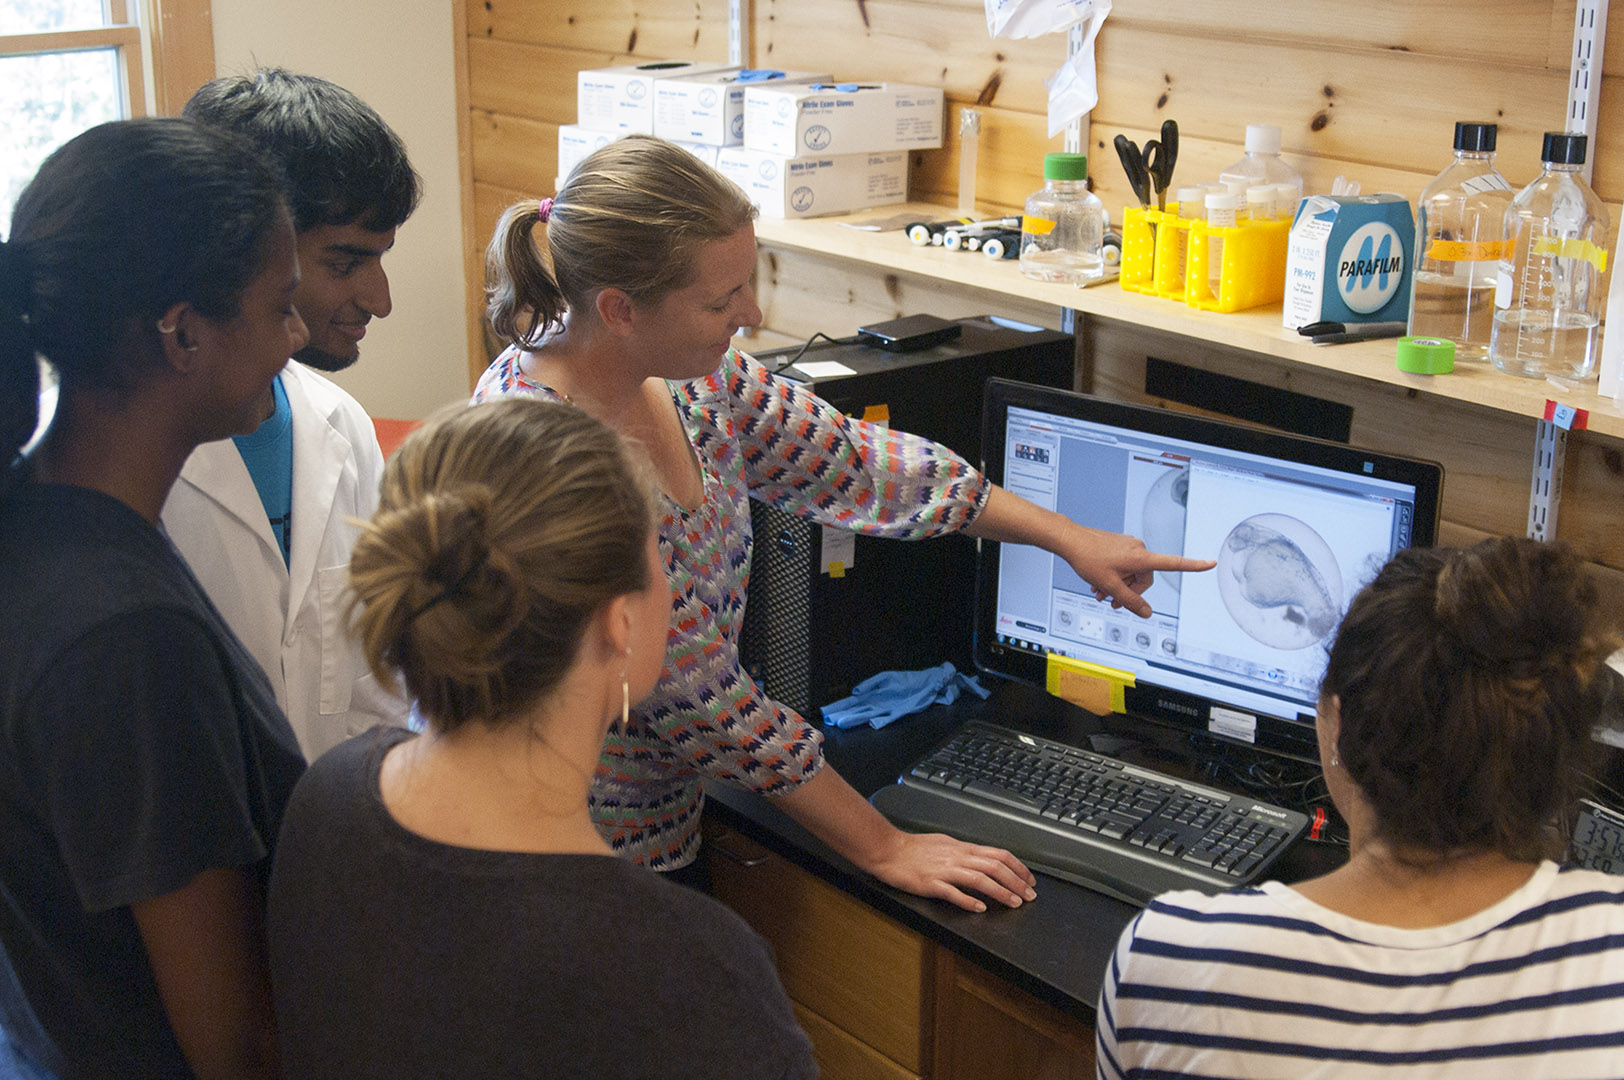 Bates biology professor Larissa Williams discusses the image of a zebrafish embryo at the Mount Desert Island Biological Laboratory on July 23. Mostly from Bates, the students with her are, from left, Nabil Saleem '15, Roshni Mangar (College of the Atlantic '16), Katie Paulson '15 and Sophie Salas '15. (Bill Church/MDIBL)